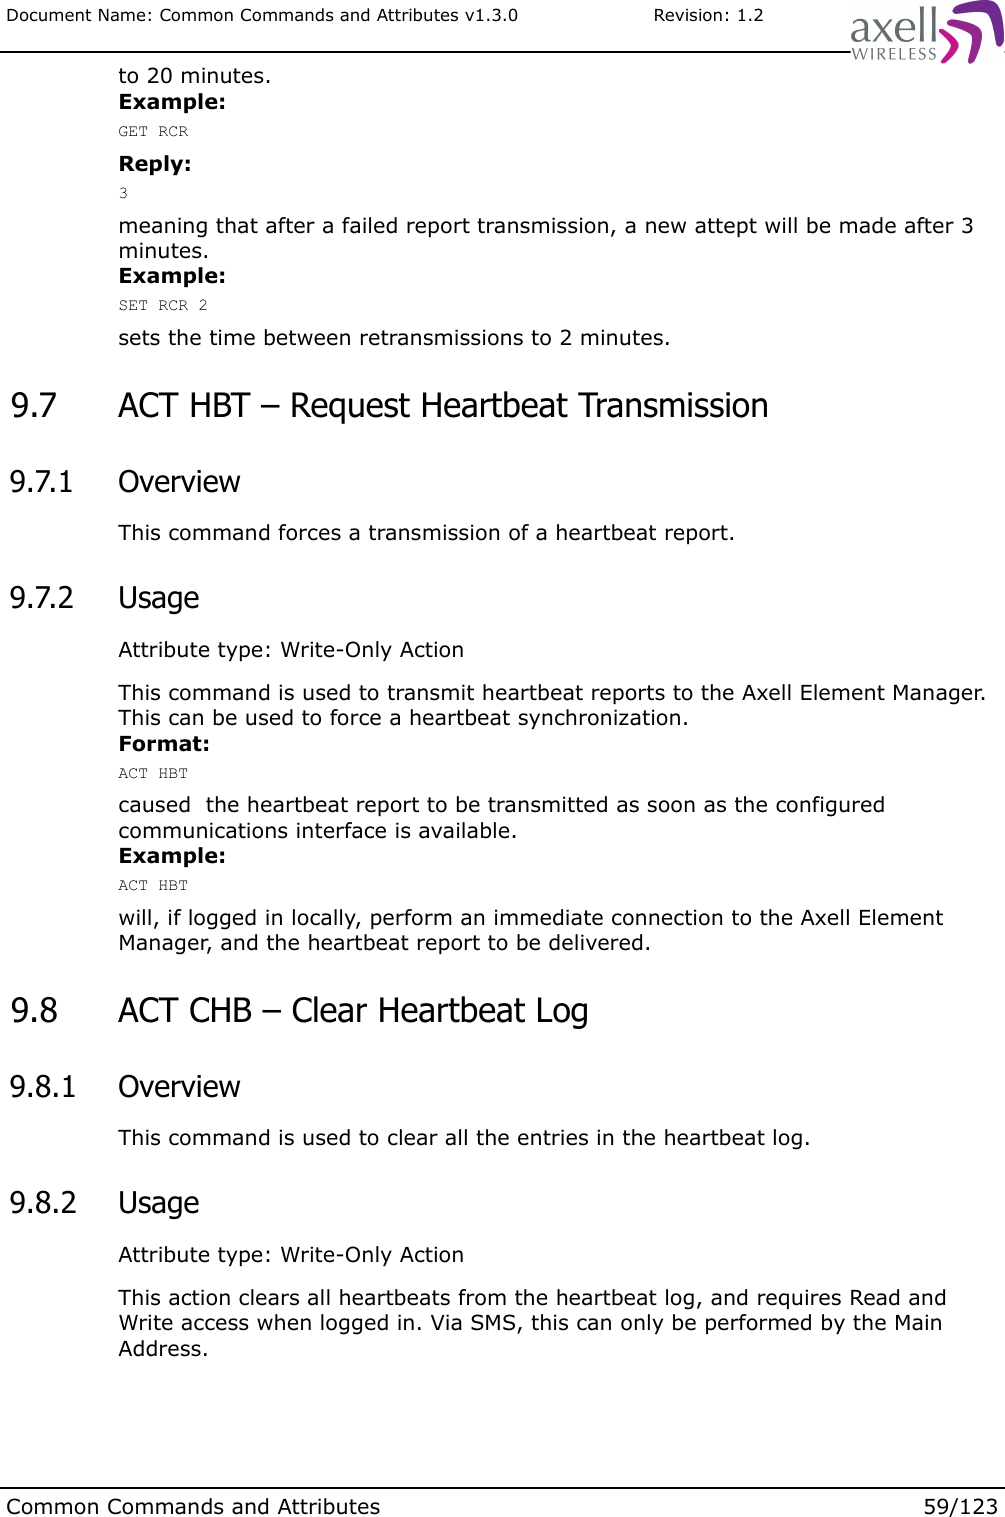 Document Name: Common Commands and Attributes v1.3.0                       Revision: 1.2to 20 minutes.Example:GET RCRReply:3meaning that after a failed report transmission, a new attept will be made after 3 minutes.Example:SET RCR 2sets the time between retransmissions to 2 minutes. 9.7  ACT HBT – Request Heartbeat Transmission 9.7.1  OverviewThis command forces a transmission of a heartbeat report. 9.7.2  UsageAttribute type: Write-Only ActionThis command is used to transmit heartbeat reports to the Axell Element Manager. This can be used to force a heartbeat synchronization.  Format:ACT HBTcaused  the heartbeat report to be transmitted as soon as the configured communications interface is available.Example:ACT HBTwill, if logged in locally, perform an immediate connection to the Axell Element Manager, and the heartbeat report to be delivered. 9.8  ACT CHB – Clear Heartbeat Log 9.8.1  OverviewThis command is used to clear all the entries in the heartbeat log. 9.8.2  UsageAttribute type: Write-Only ActionThis action clears all heartbeats from the heartbeat log, and requires Read and Write access when logged in. Via SMS, this can only be performed by the Main Address.Common Commands and Attributes 59/123